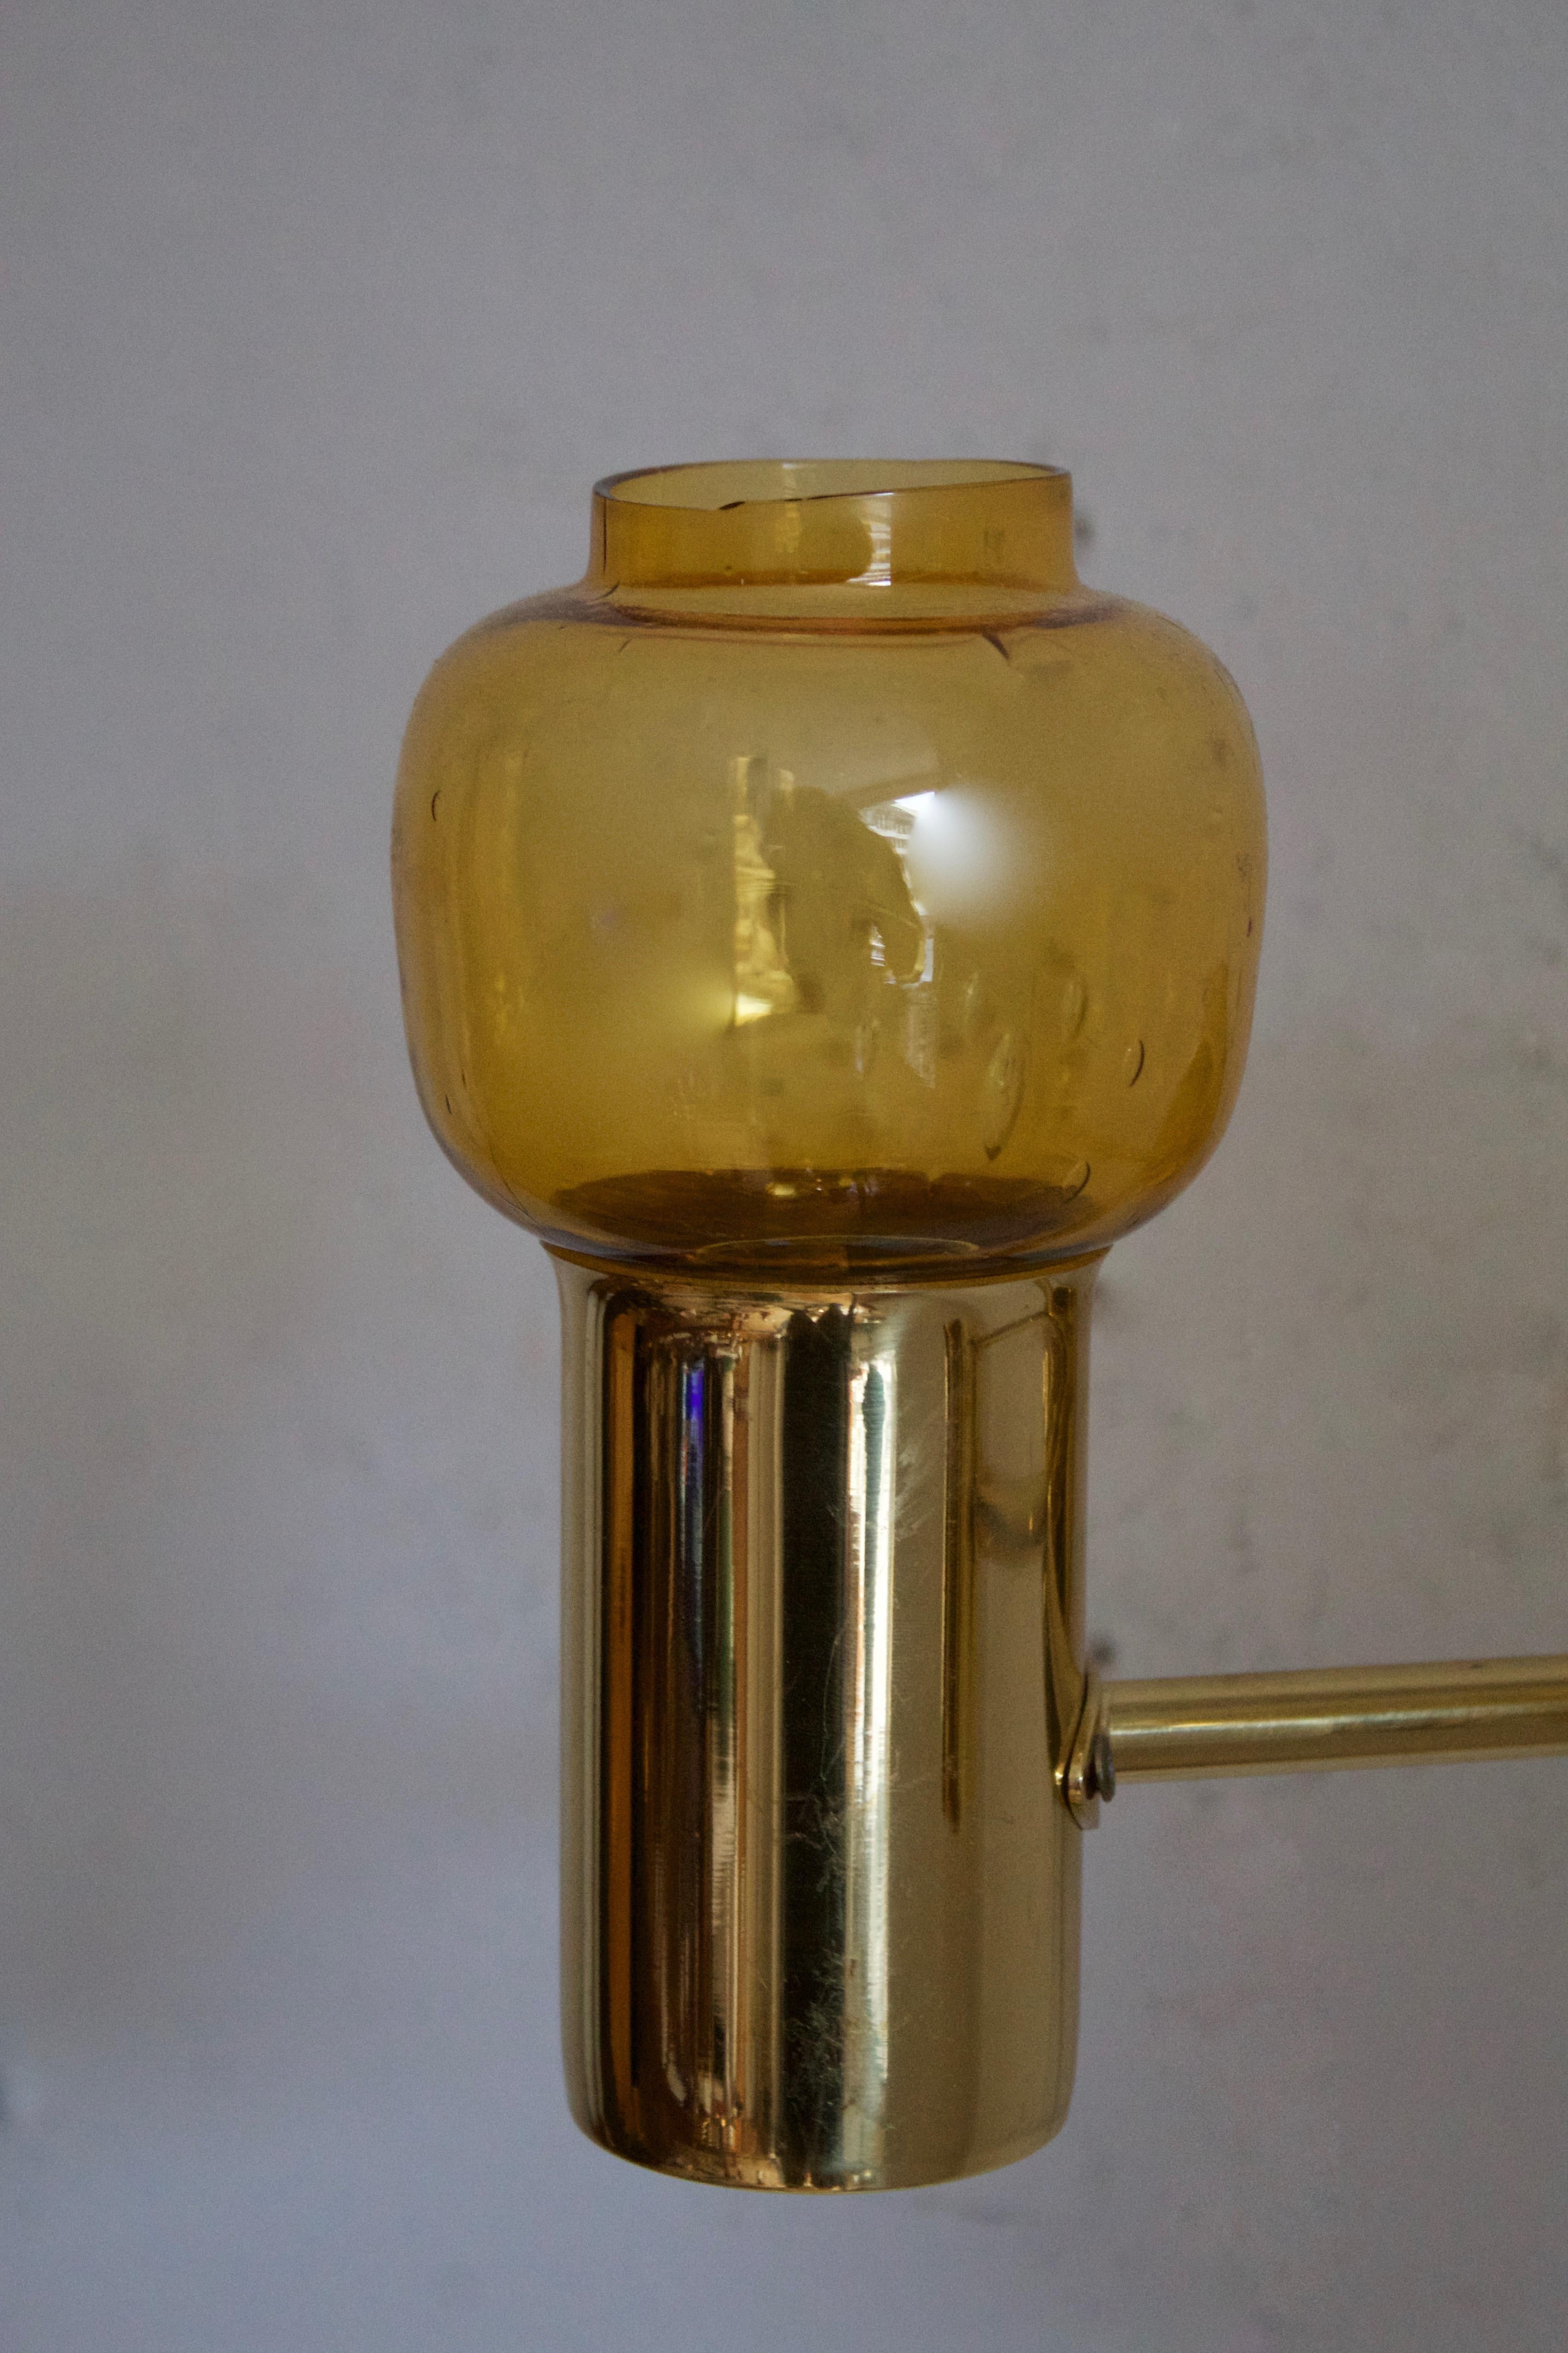 Mid-20th Century Hans-Agne Jakobsson, Two-Armed Wall Light, Brass, Glass, Sweden, c. 1970s For Sale